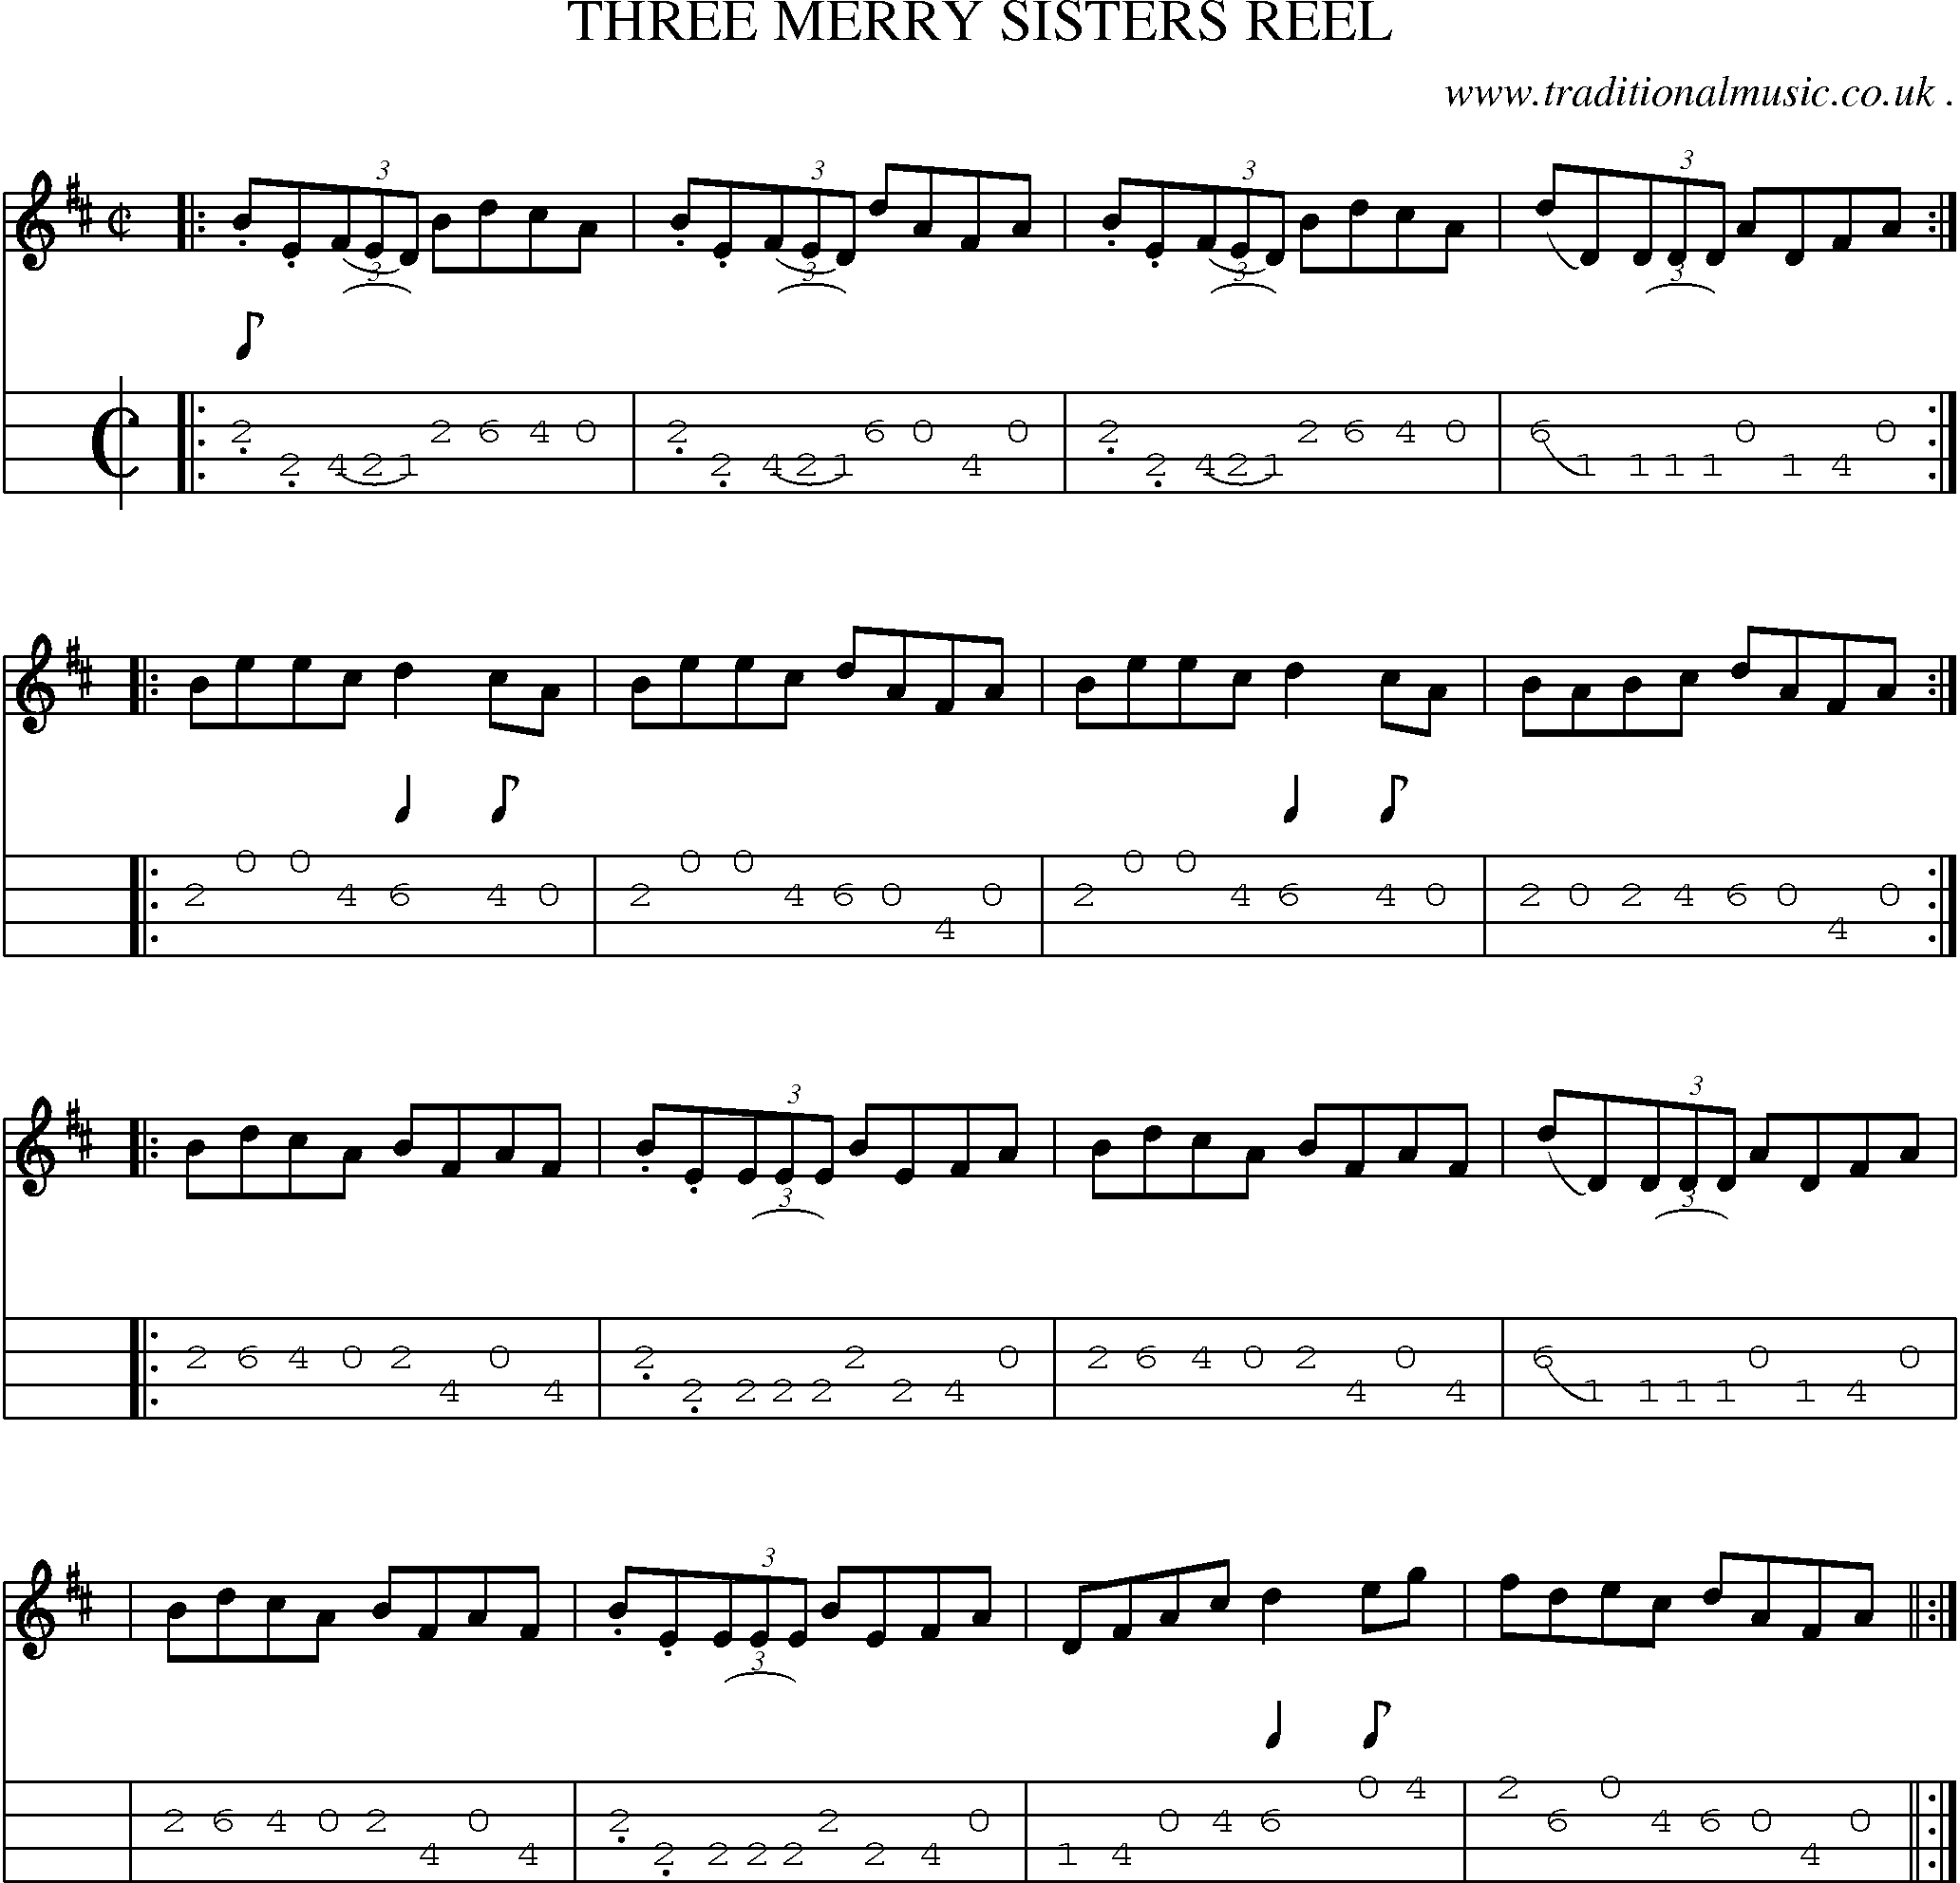 Sheet-Music and Mandolin Tabs for Three Merry Sisters Reel